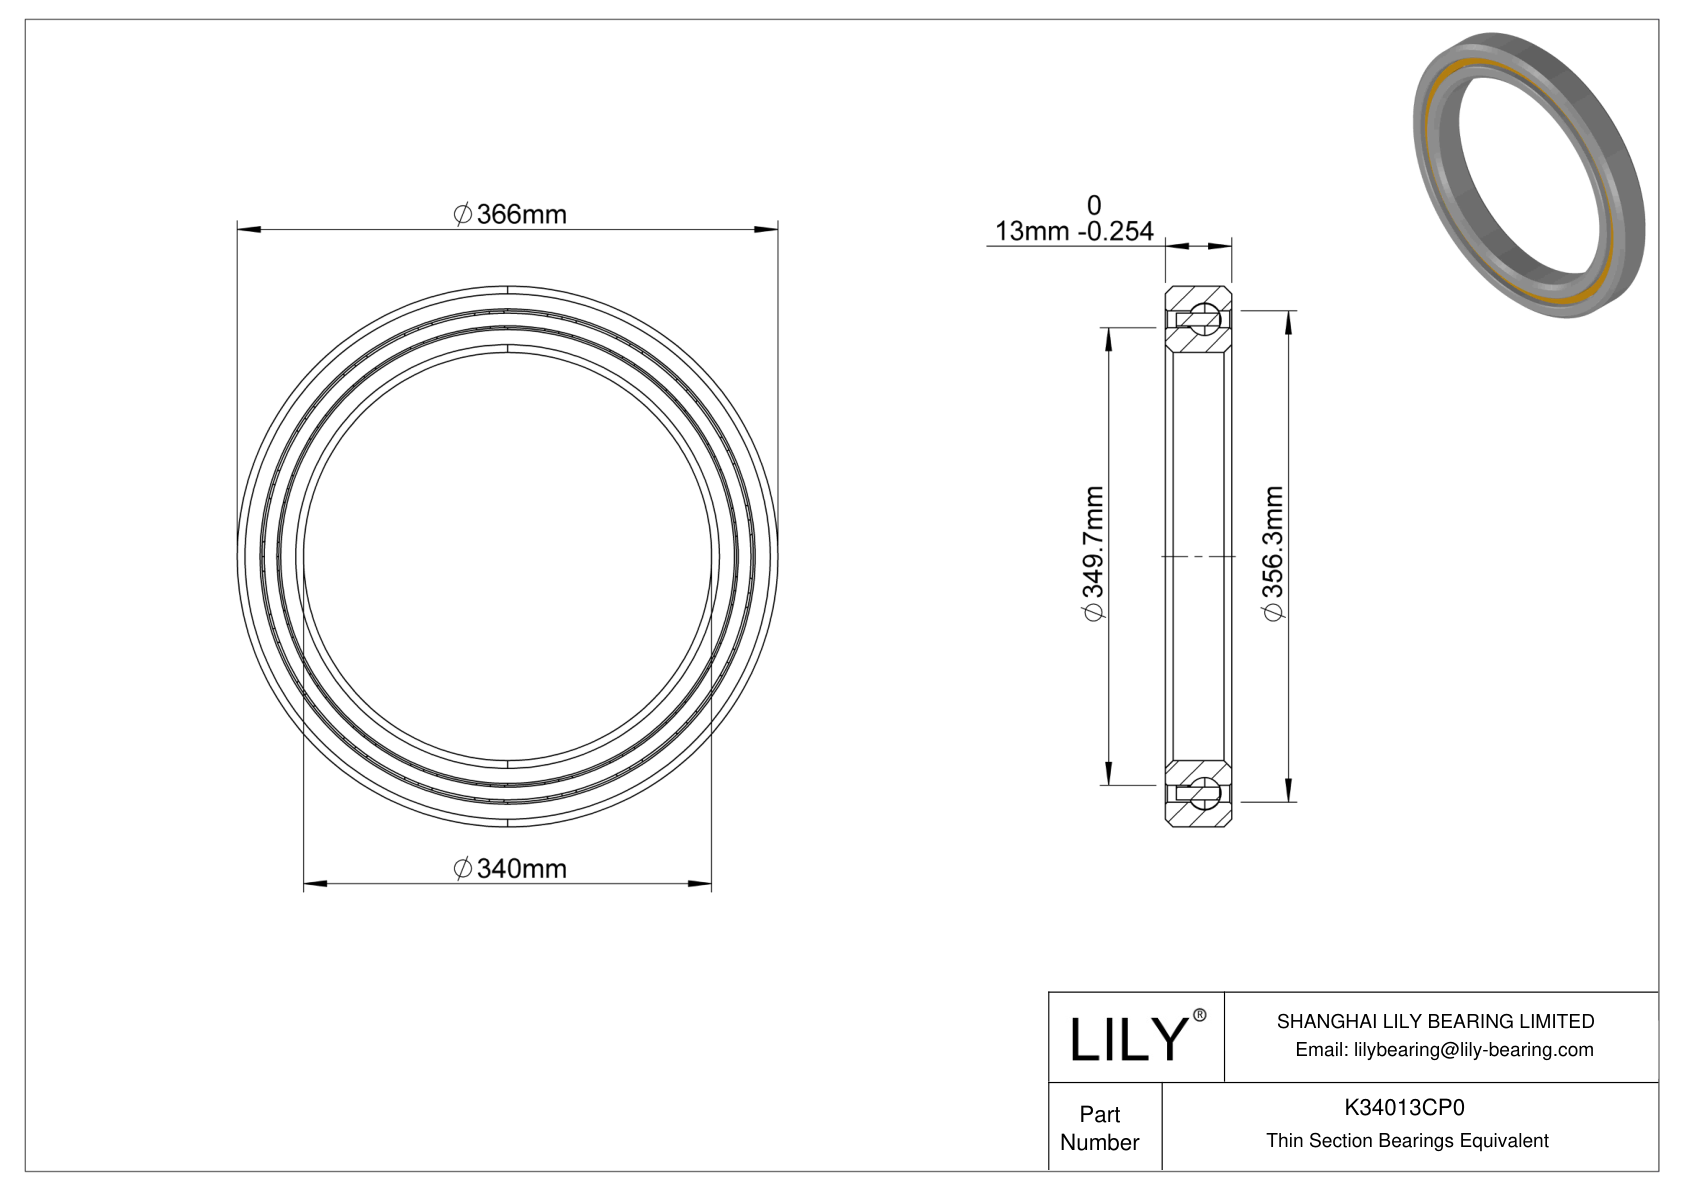 K34013CP0 Constant Section (CS) Bearings cad drawing